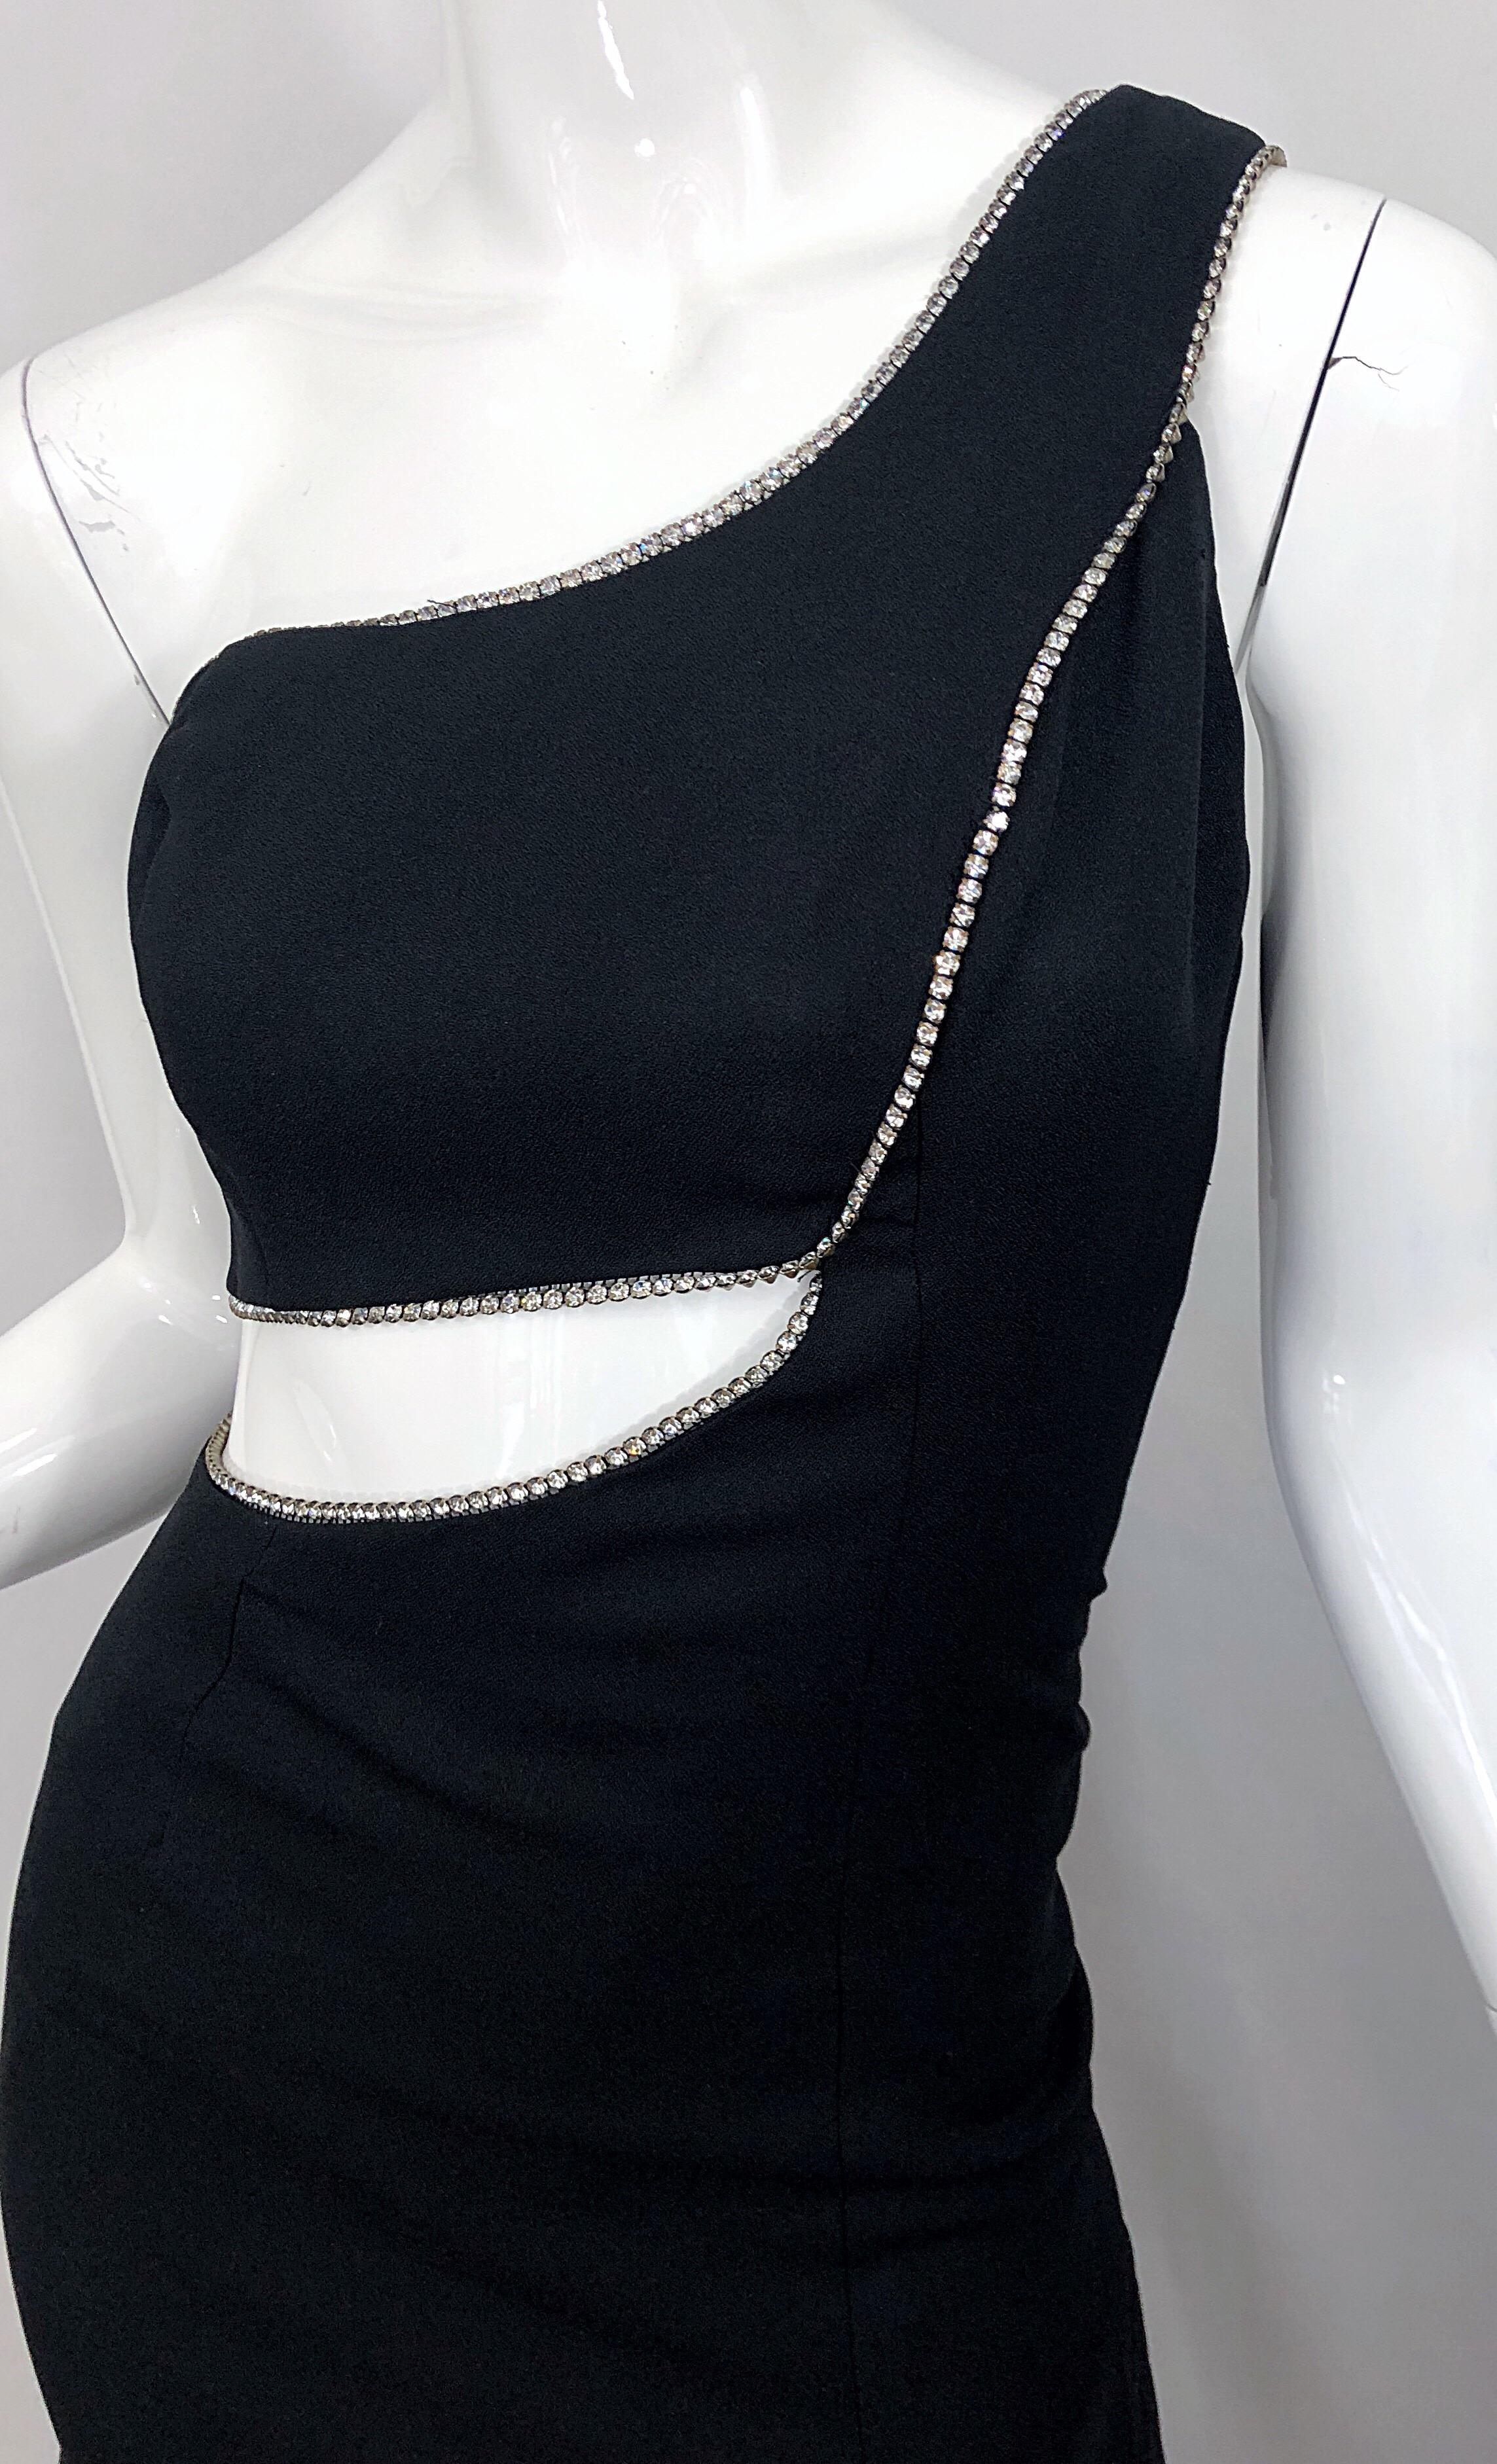 black cut out dress with rhinestones